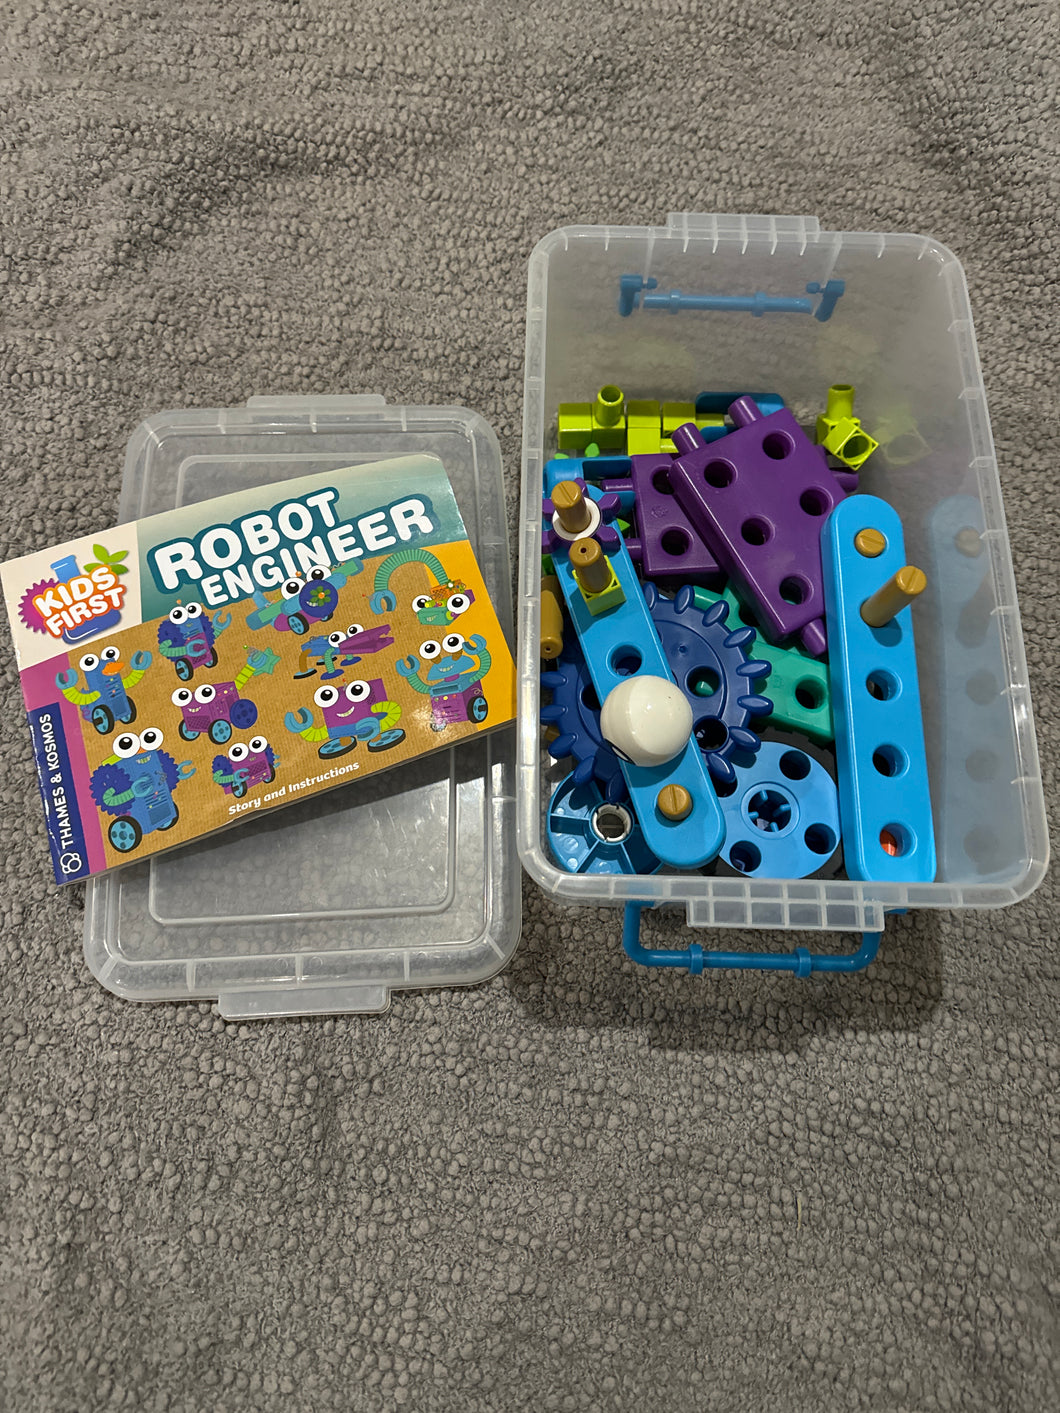 Build your own Monster with guide. Includes storage bin.